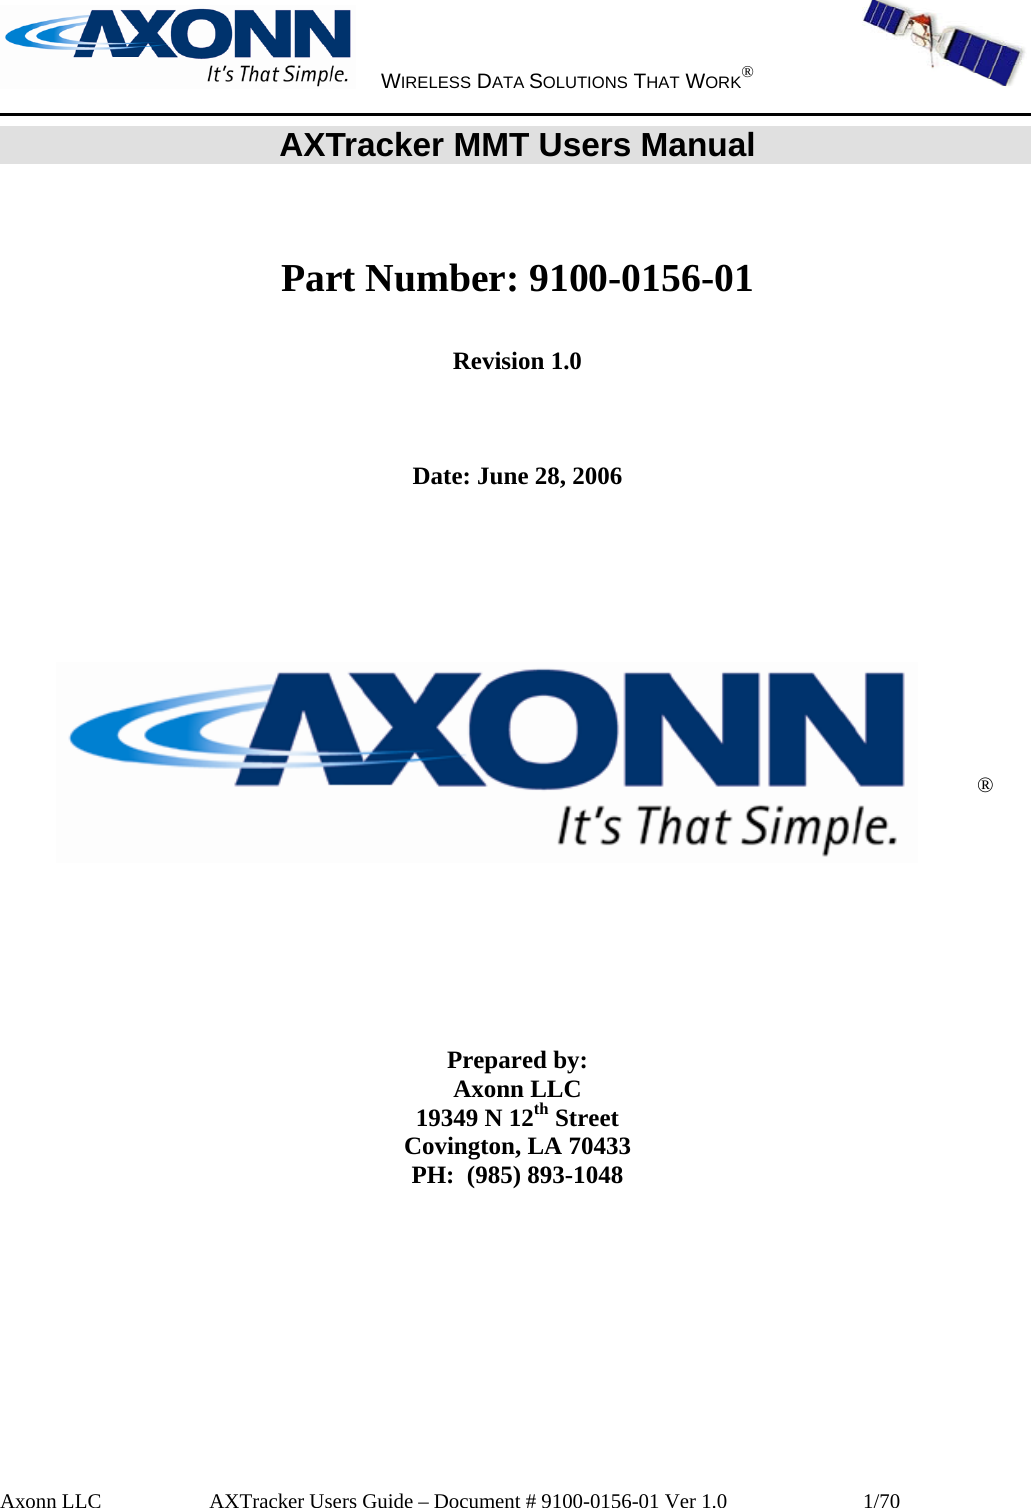     WIRELESS DATA SOLUTIONS THAT WORK®   Axonn LLC         AXTracker Users Guide – Document # 9100-0156-01 Ver 1.0                  1/70 AXTracker MMT Users Manual    Part Number: 9100-0156-01  Revision 1.0    Date: June 28, 2006                ®         Prepared by: Axonn LLC 19349 N 12th Street Covington, LA 70433 PH:  (985) 893-1048   